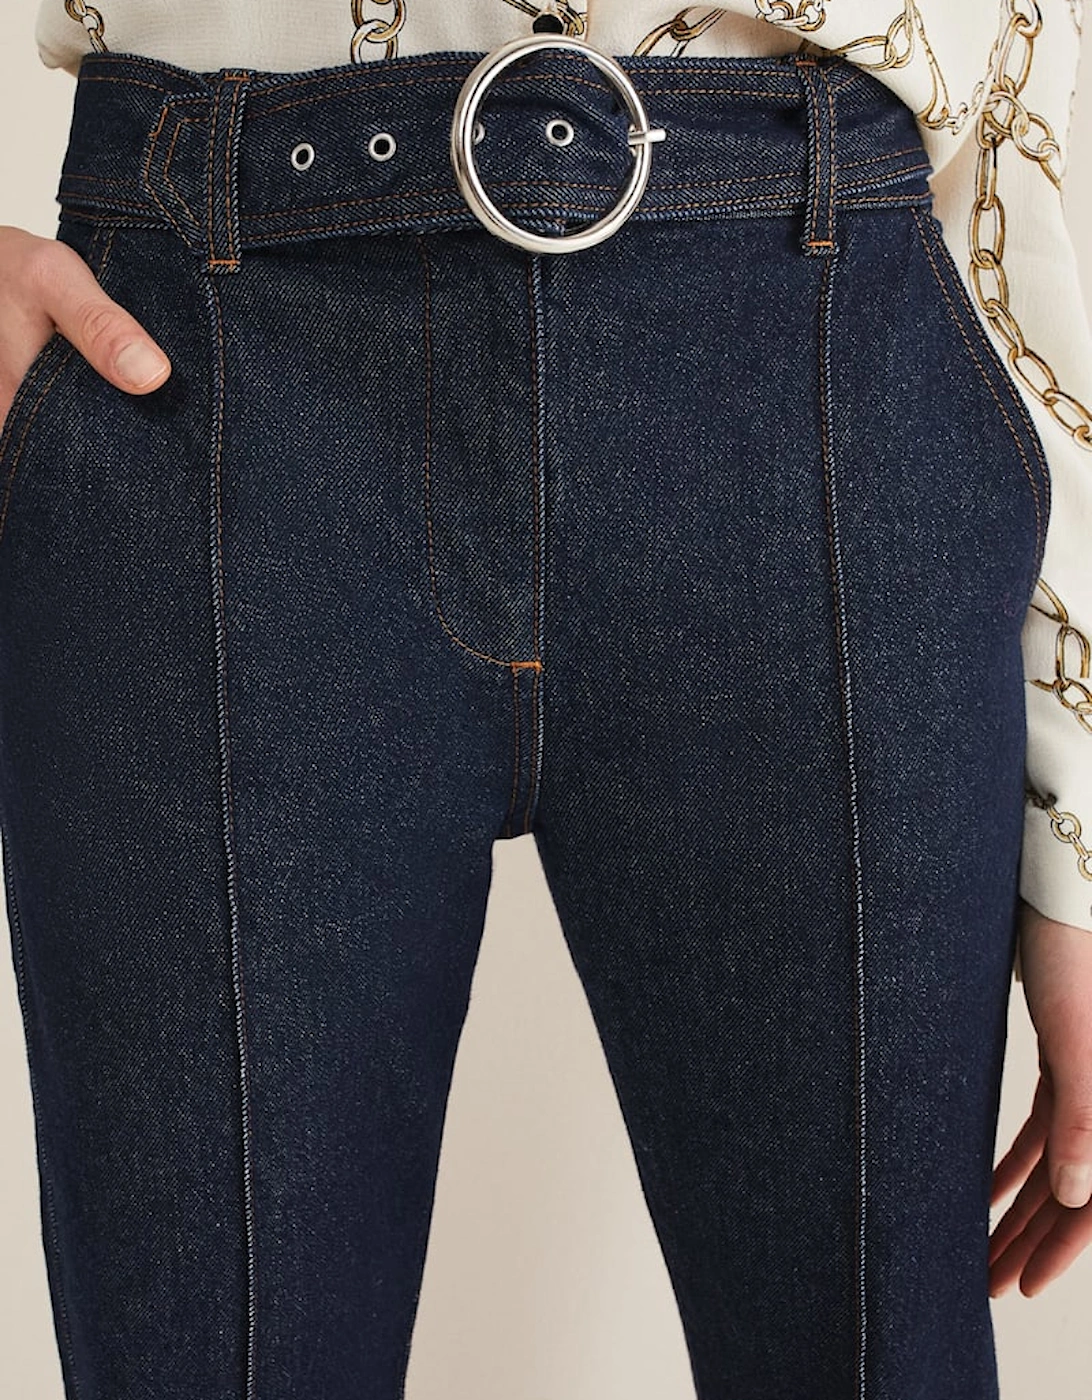 Shawna Belted Bootcut Jeans